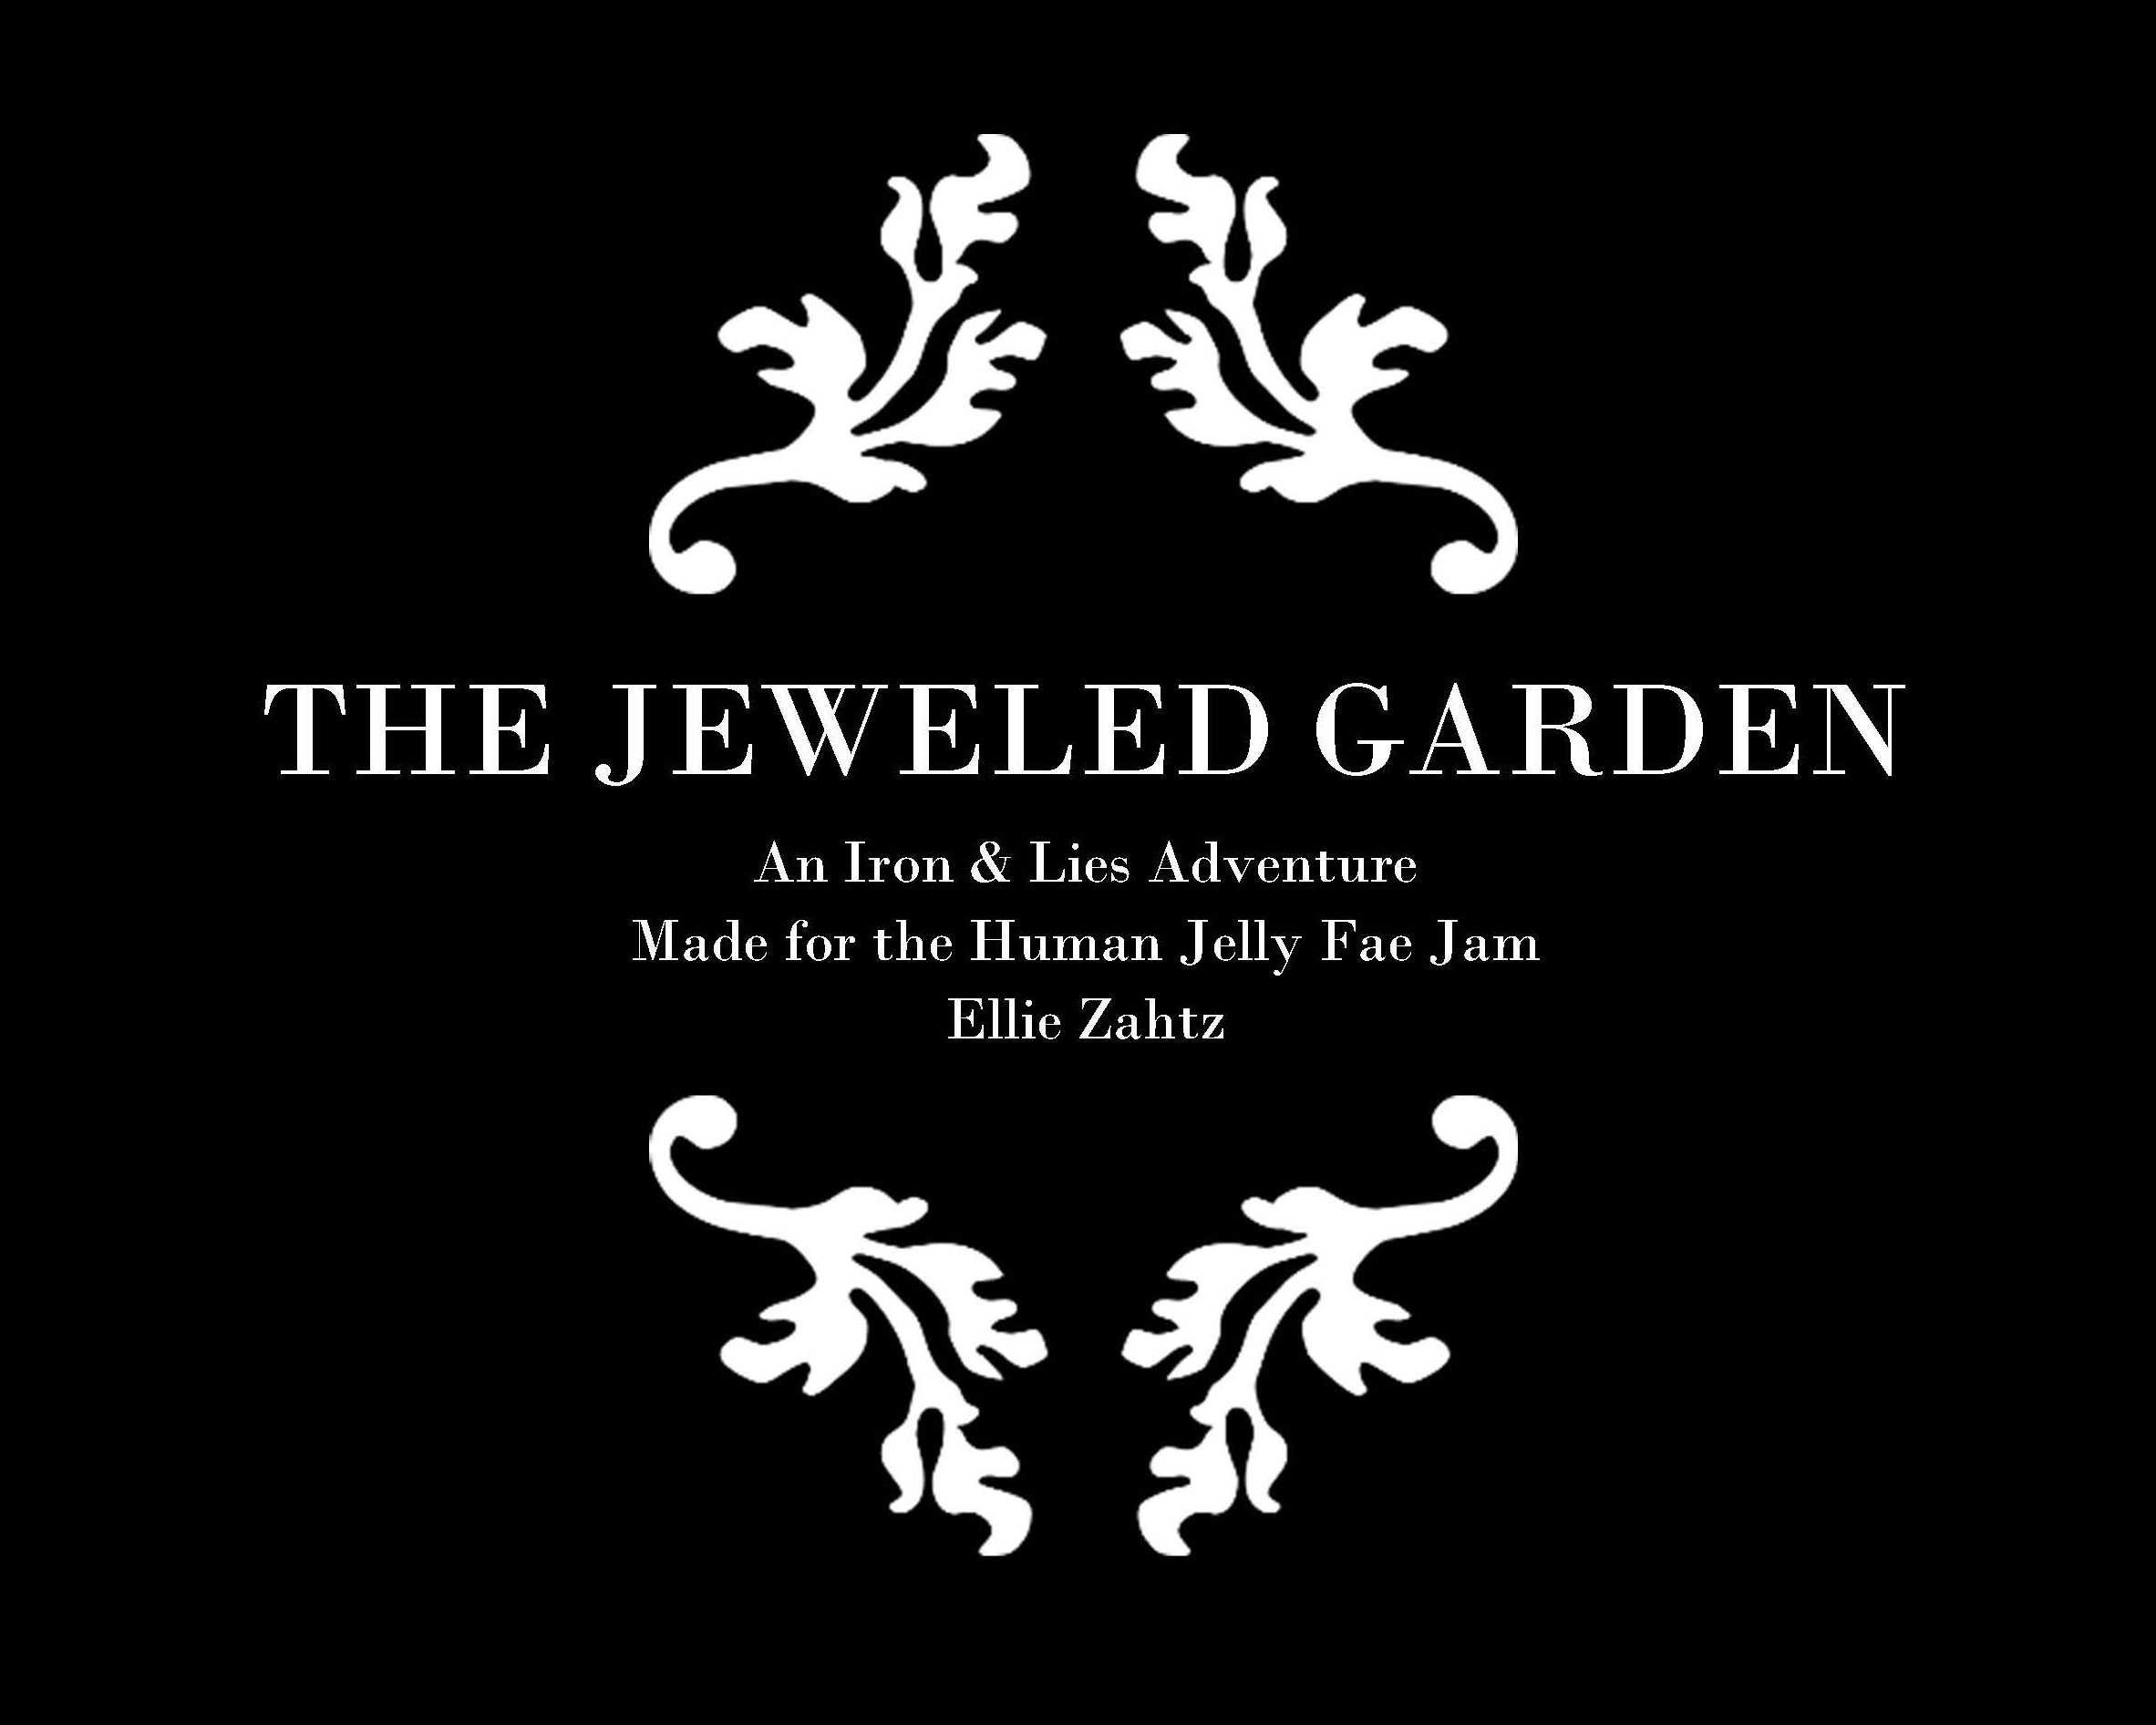 The Jeweled Garden